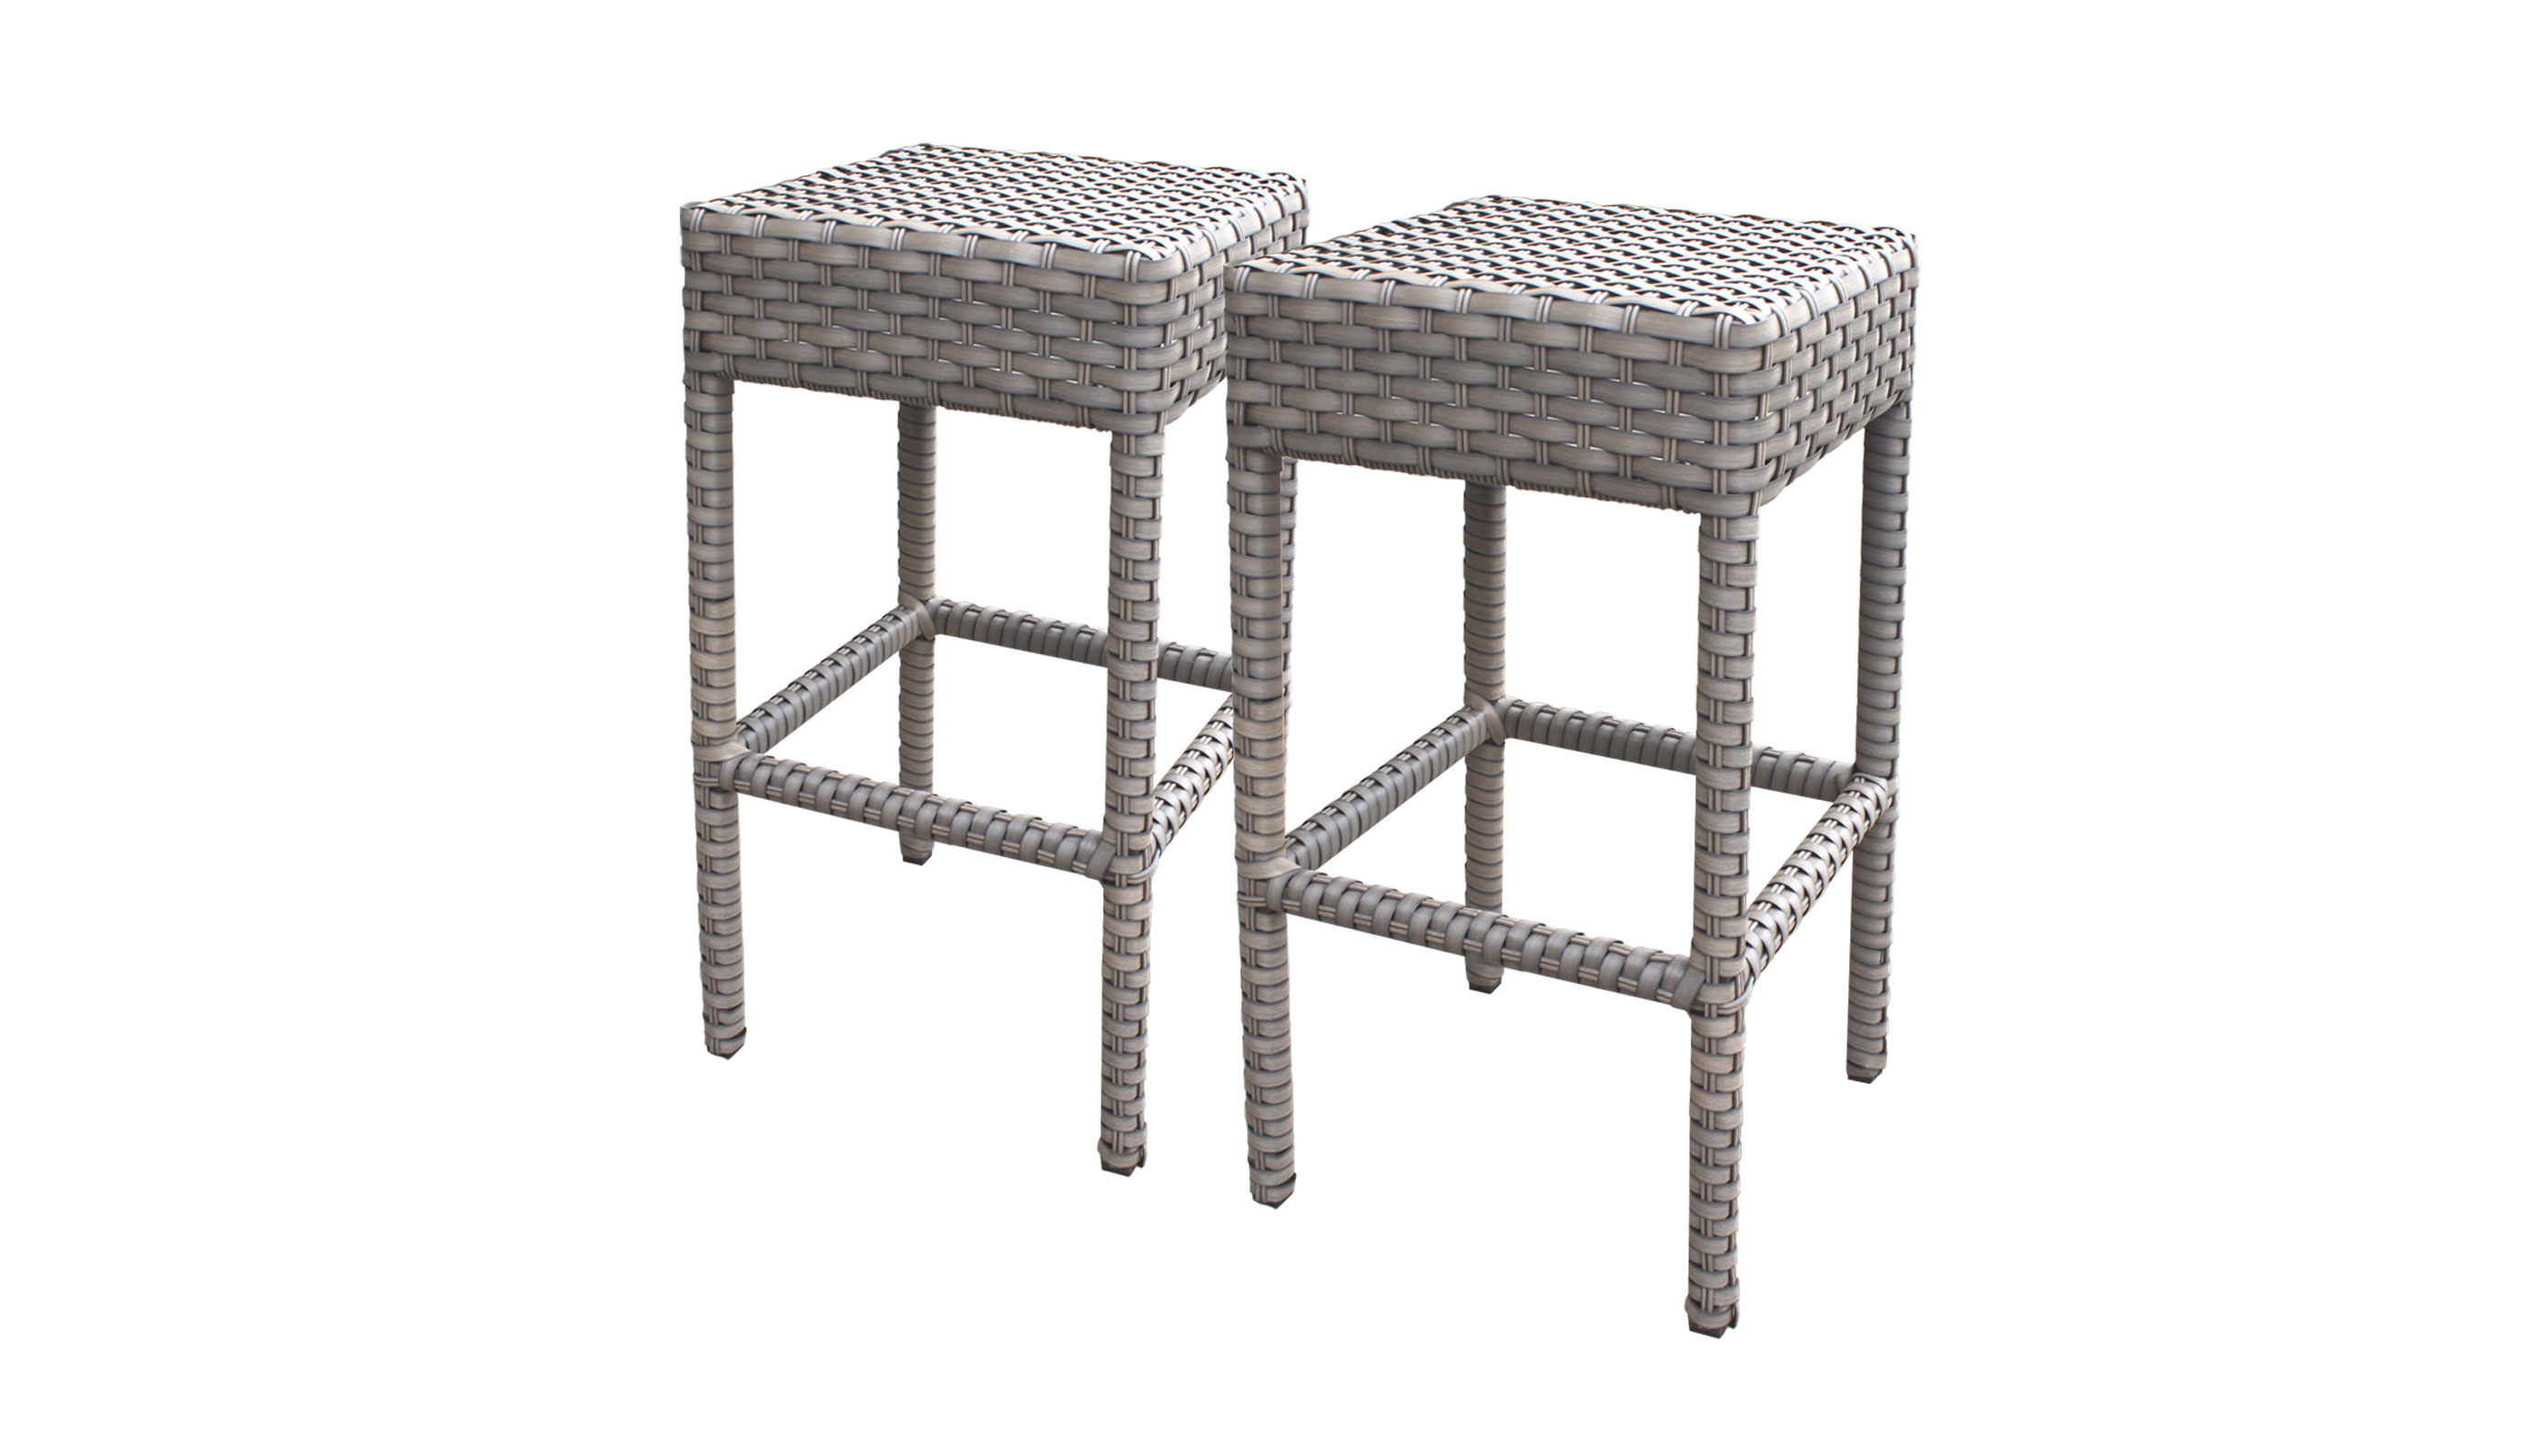 Florence Bar Table Set with Cart, Basket, and 2 Backless Barstools 5 Piece Outdoor Wicker Patio Furniture - TK Classics